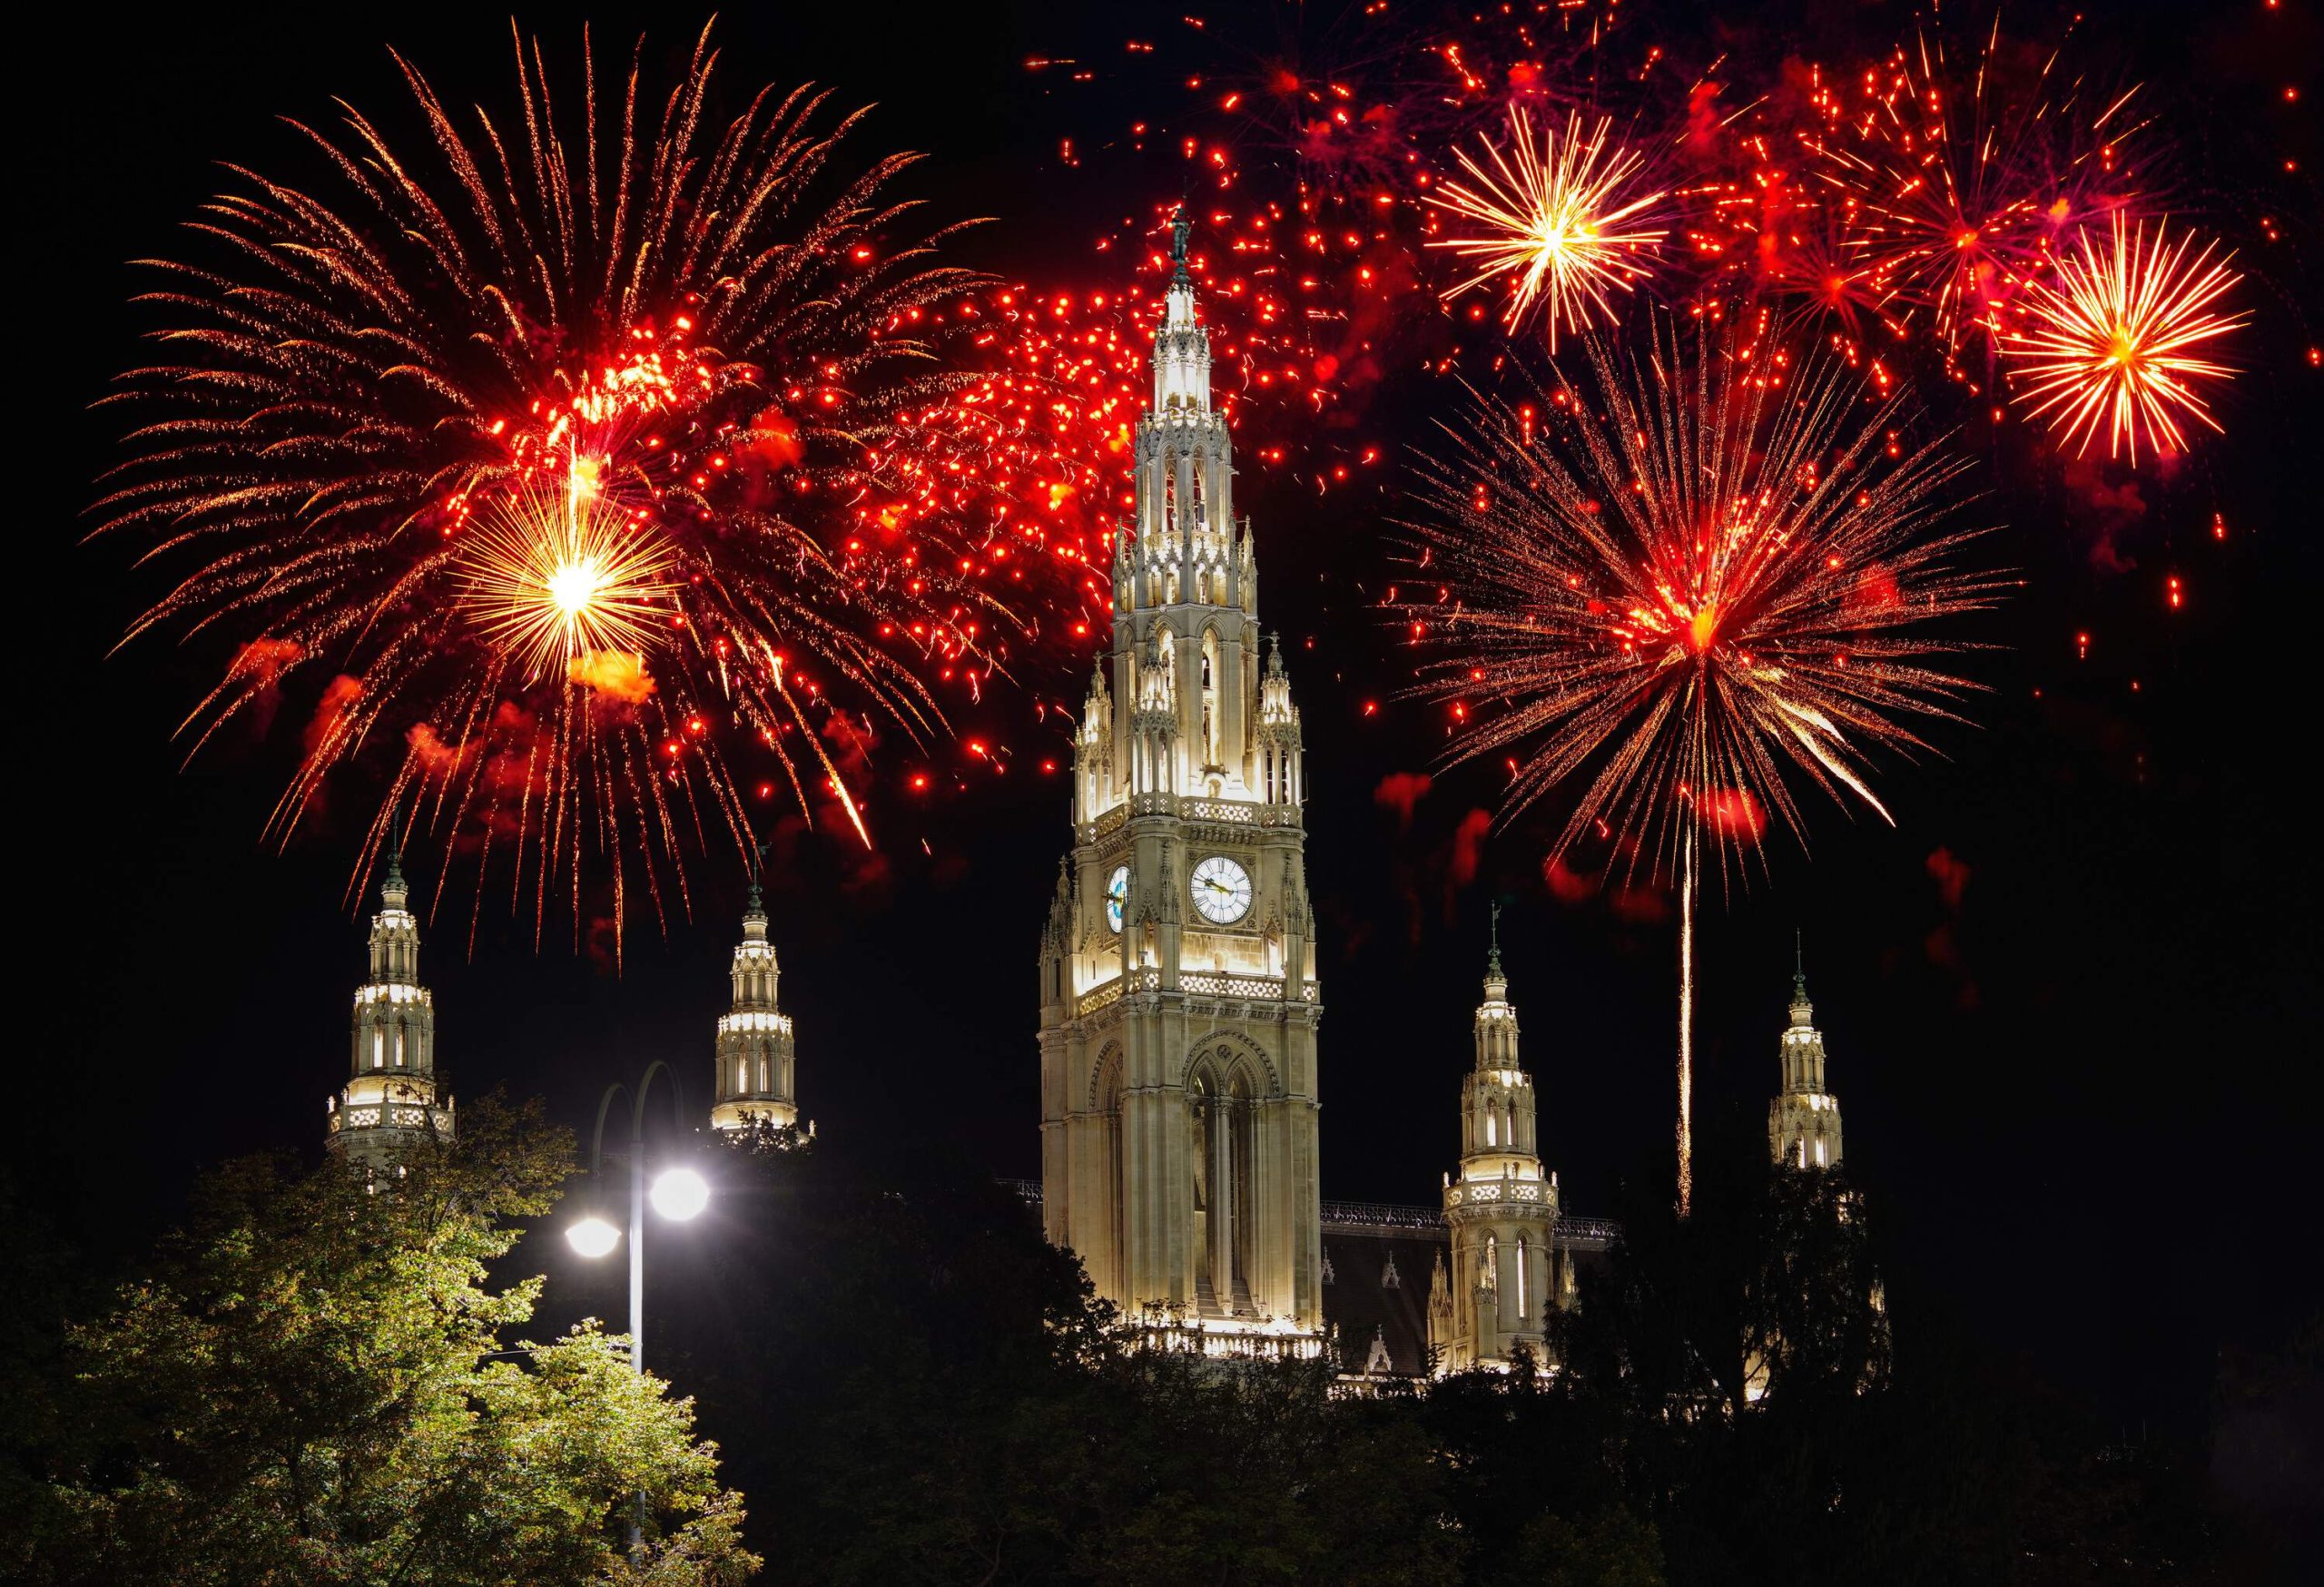 Red colored fireworks rising above some church towers